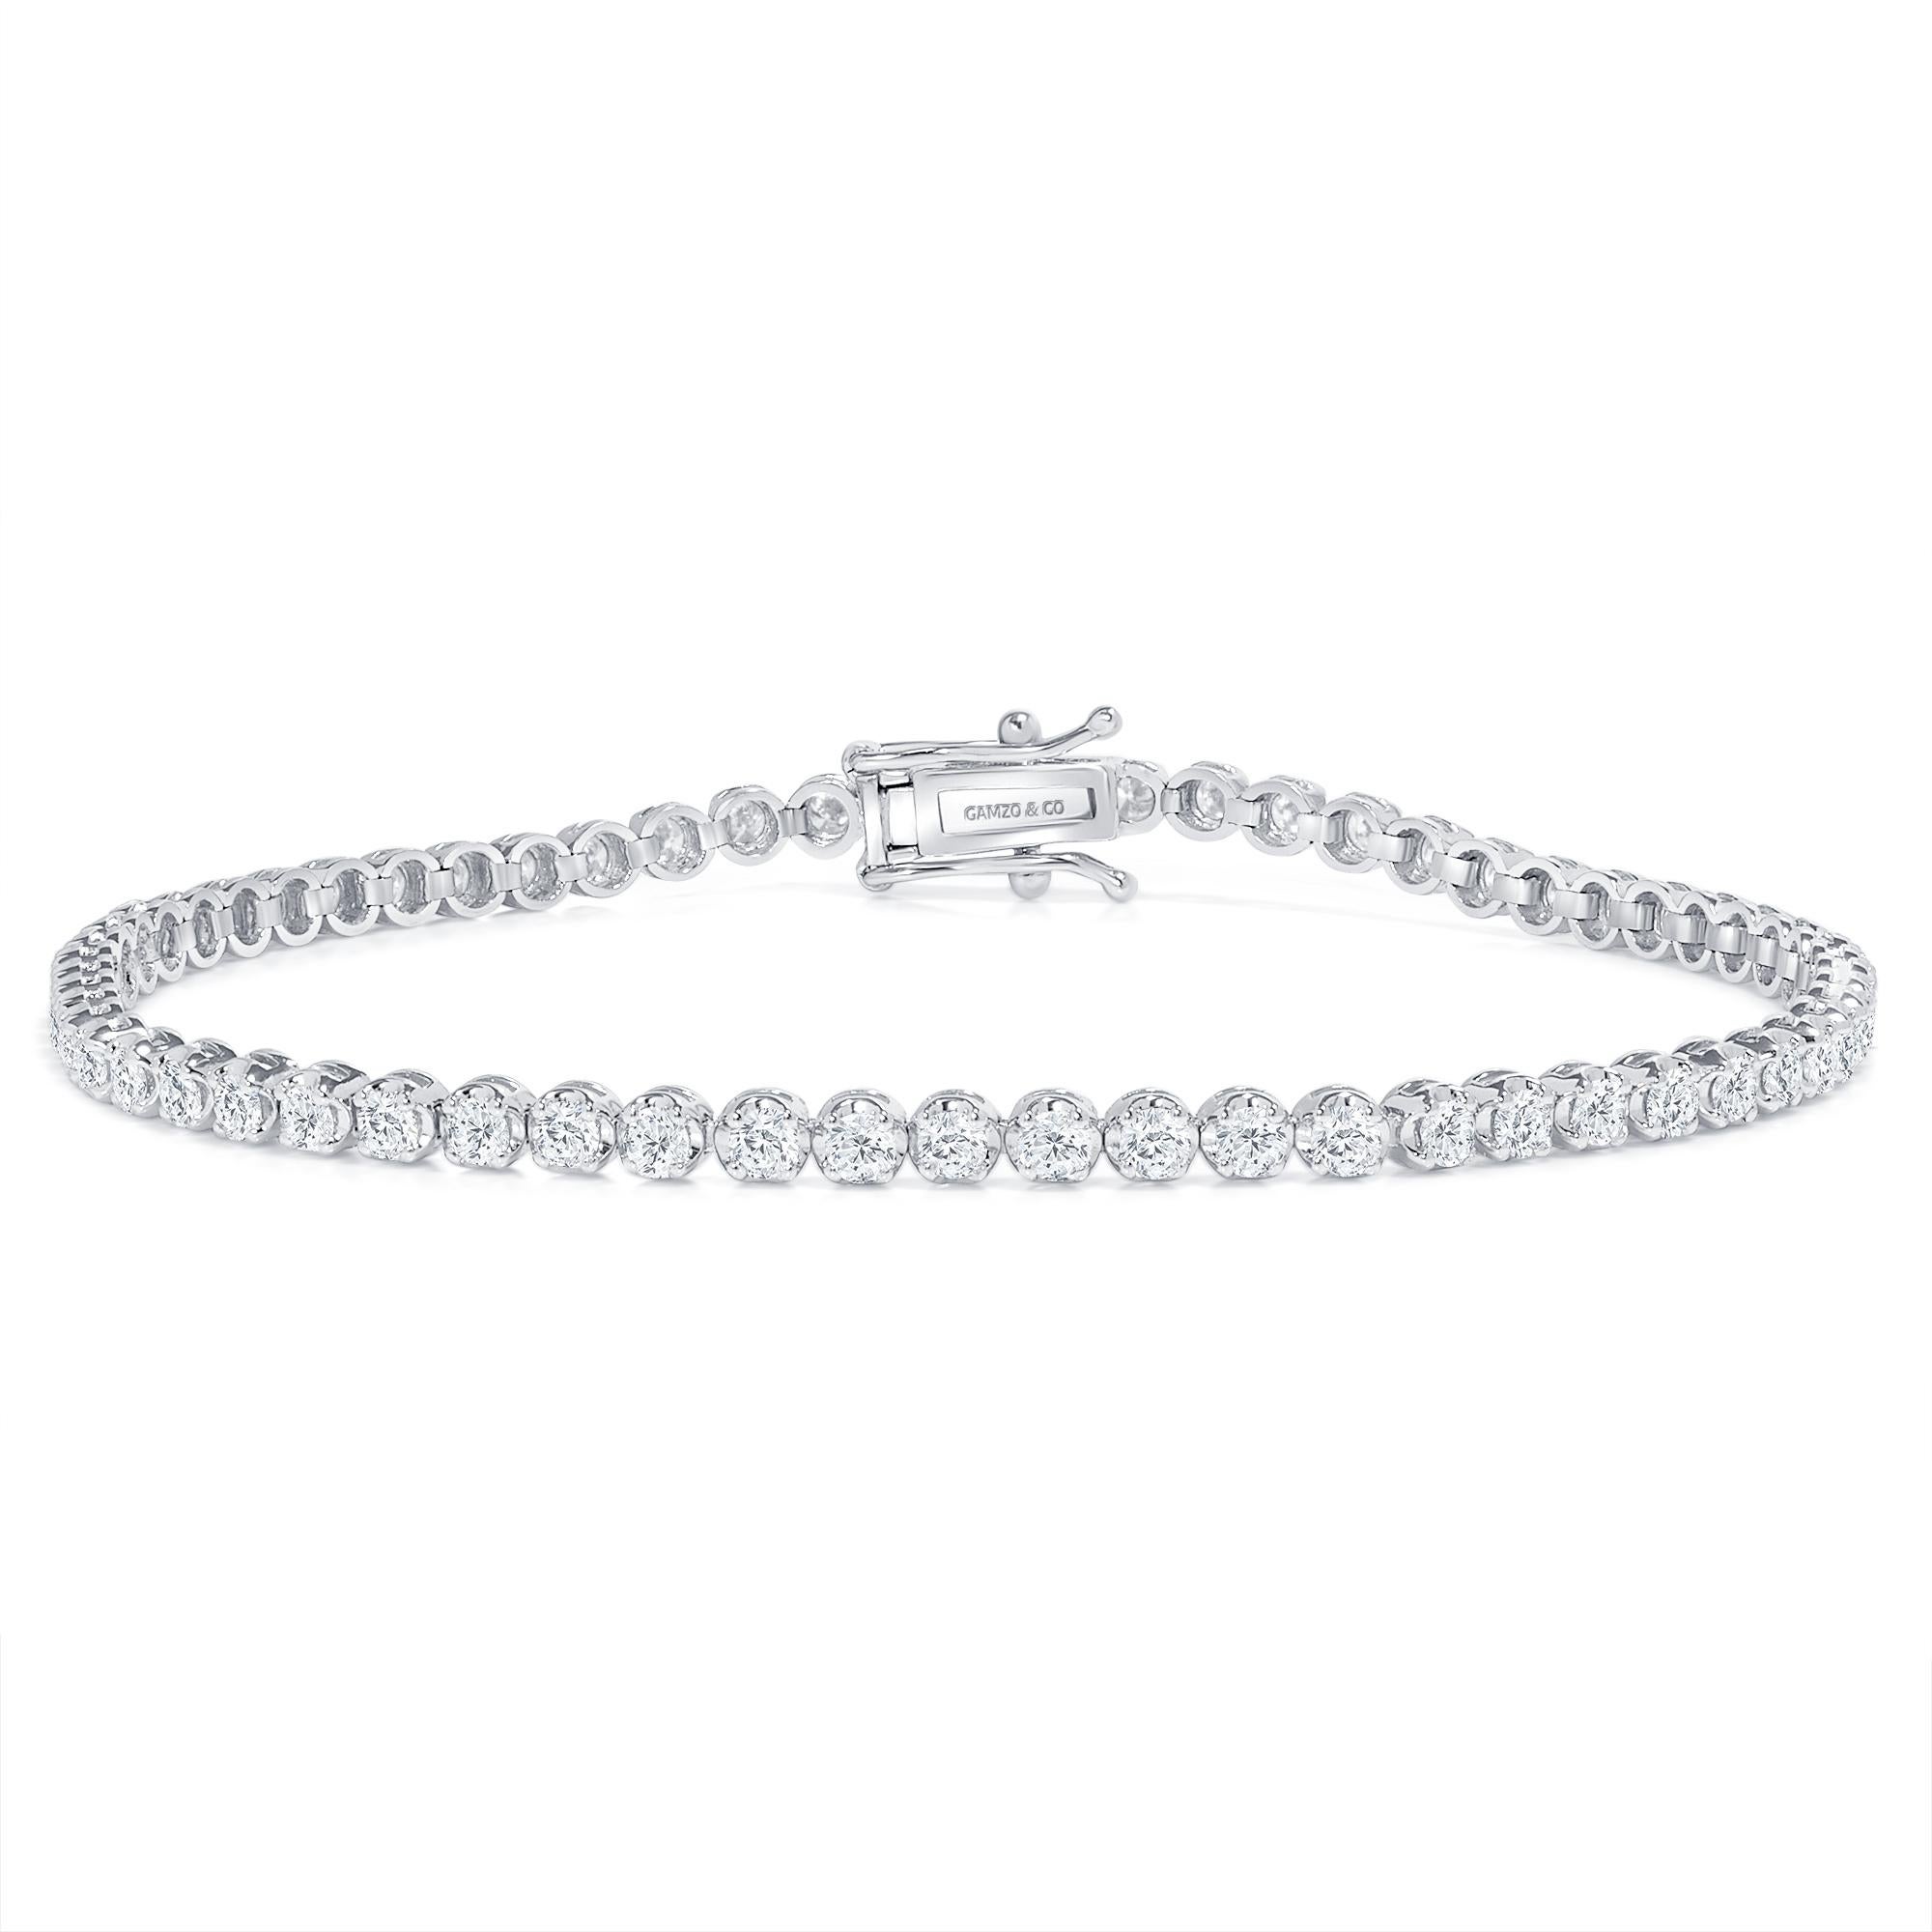 These beautiful round diamonds dance around your wrist as they absorb light and attention.
Metal: 14k Gold
Diamond Cut: Round
Diamond Total Carats: 3ct
Diamond Clarity: VS
Diamond Color: F
Color: White Gold
Bracelet Length: 8 Inches 
Included with